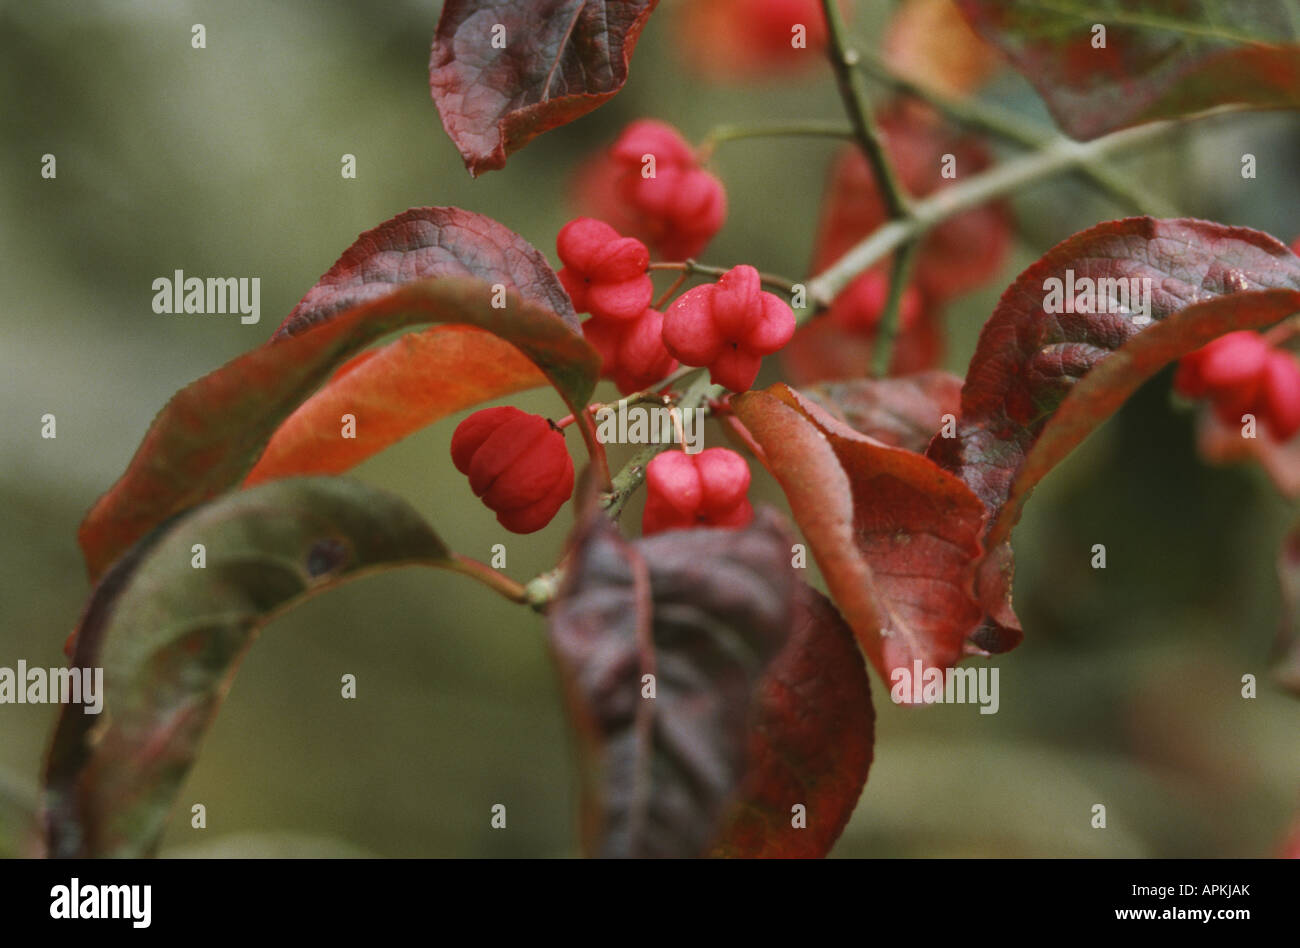 Hamilton's spindletree, Hamilton's spindle tree (Euonymus hamiltoniana, Euonymus hamiltonianus), mature fruits and leaves in au Stock Photo